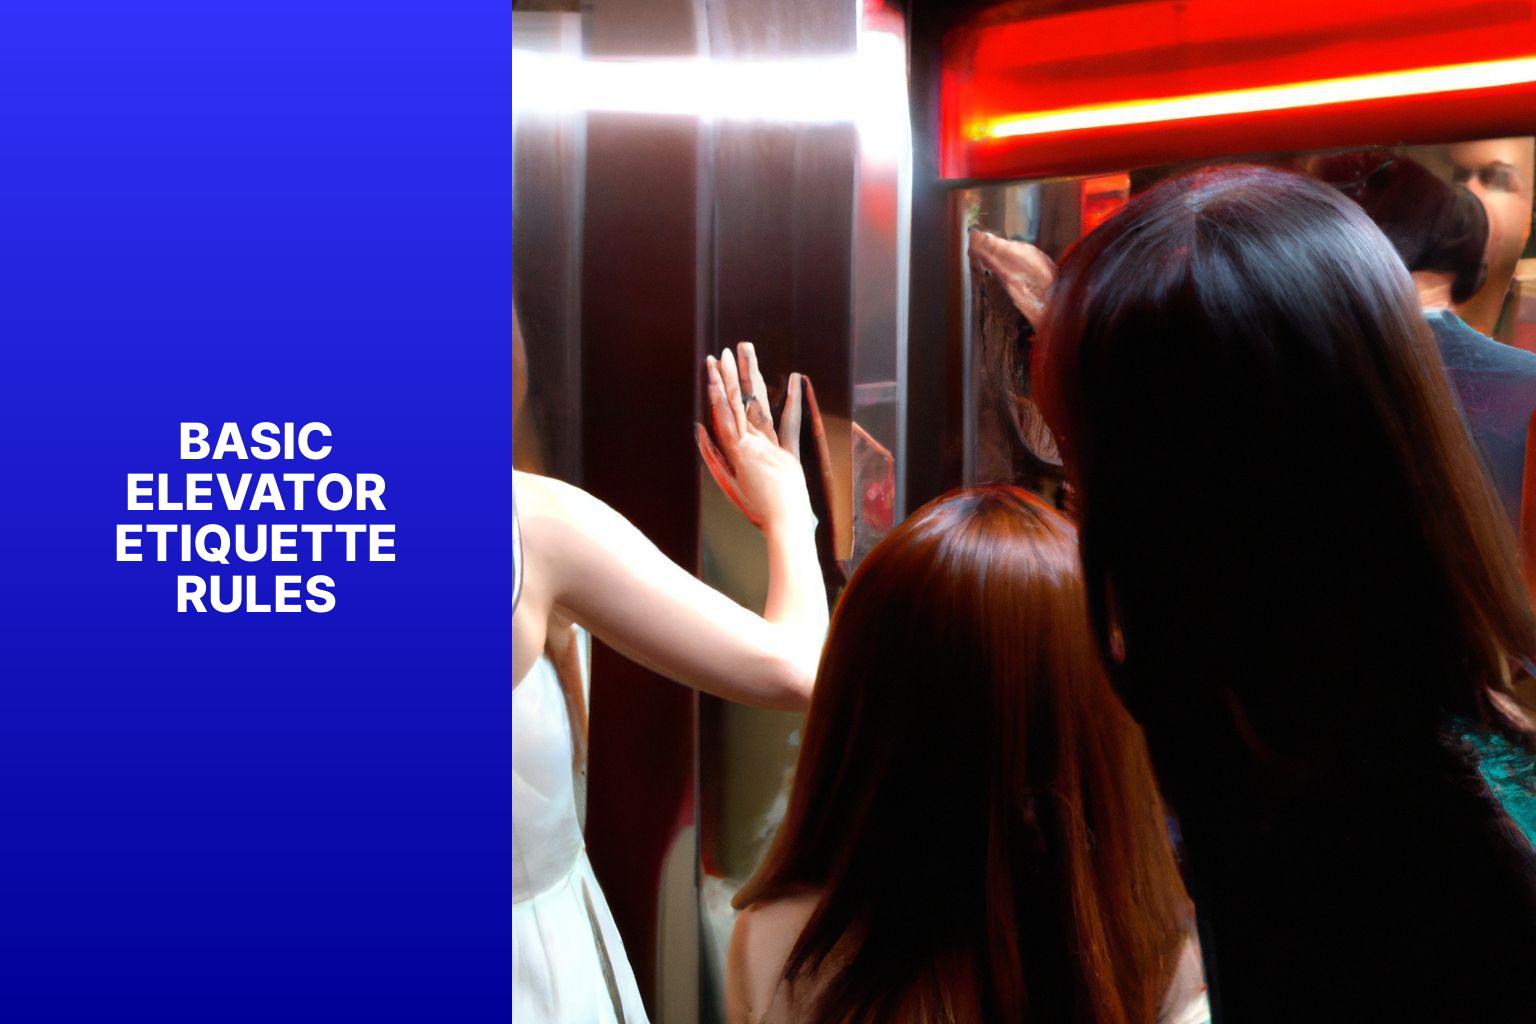 Basic Elevator Etiquette Rules - Elevator Etiquette: The Ups and Downs of Shared Spaces 